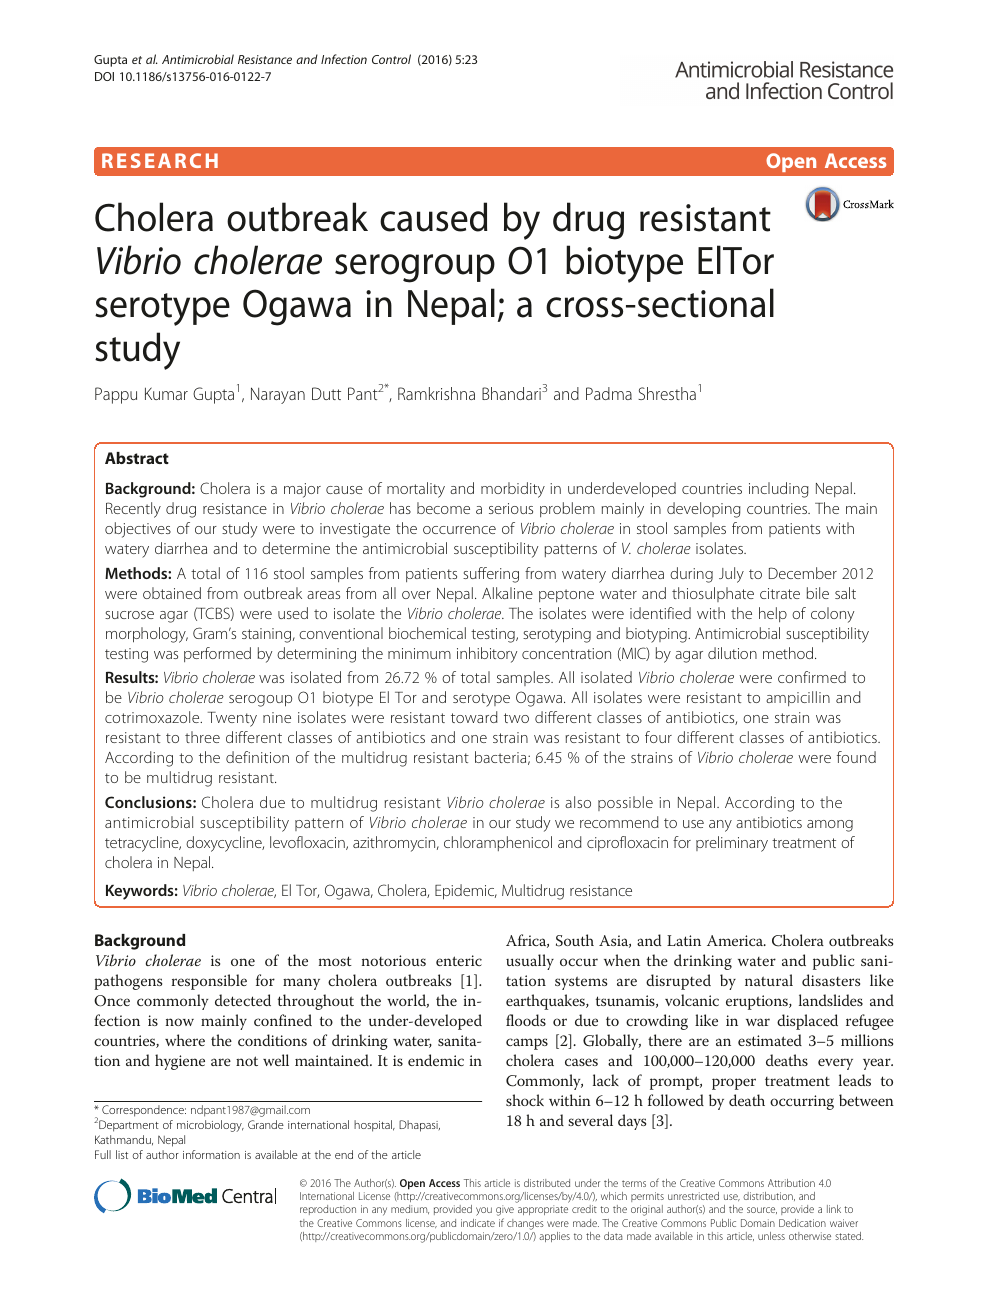 cholera research paper introduction